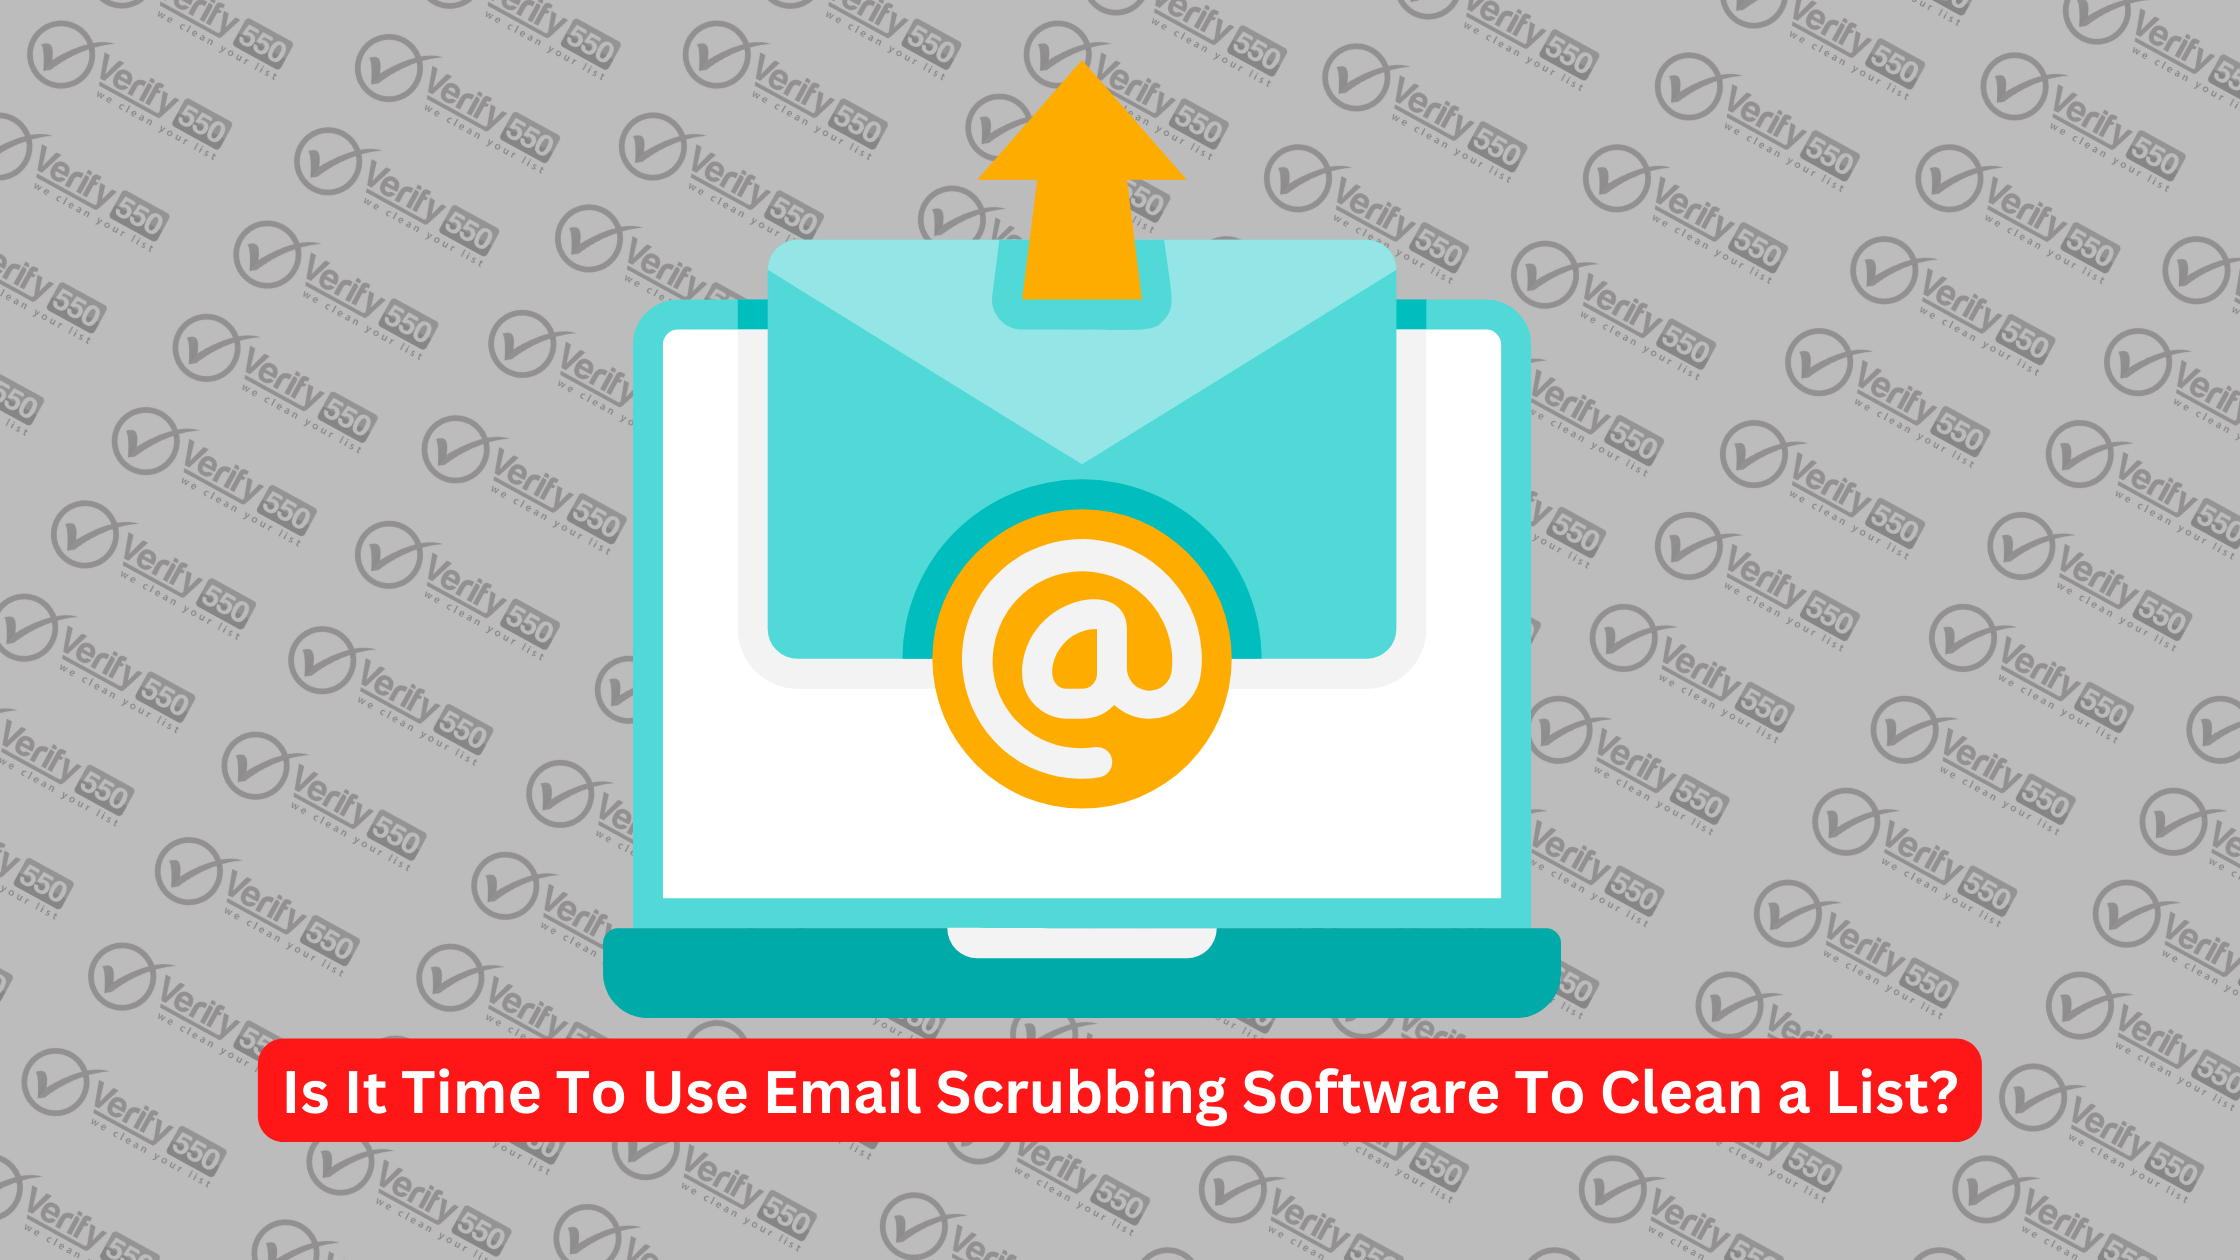 email list cleaning service